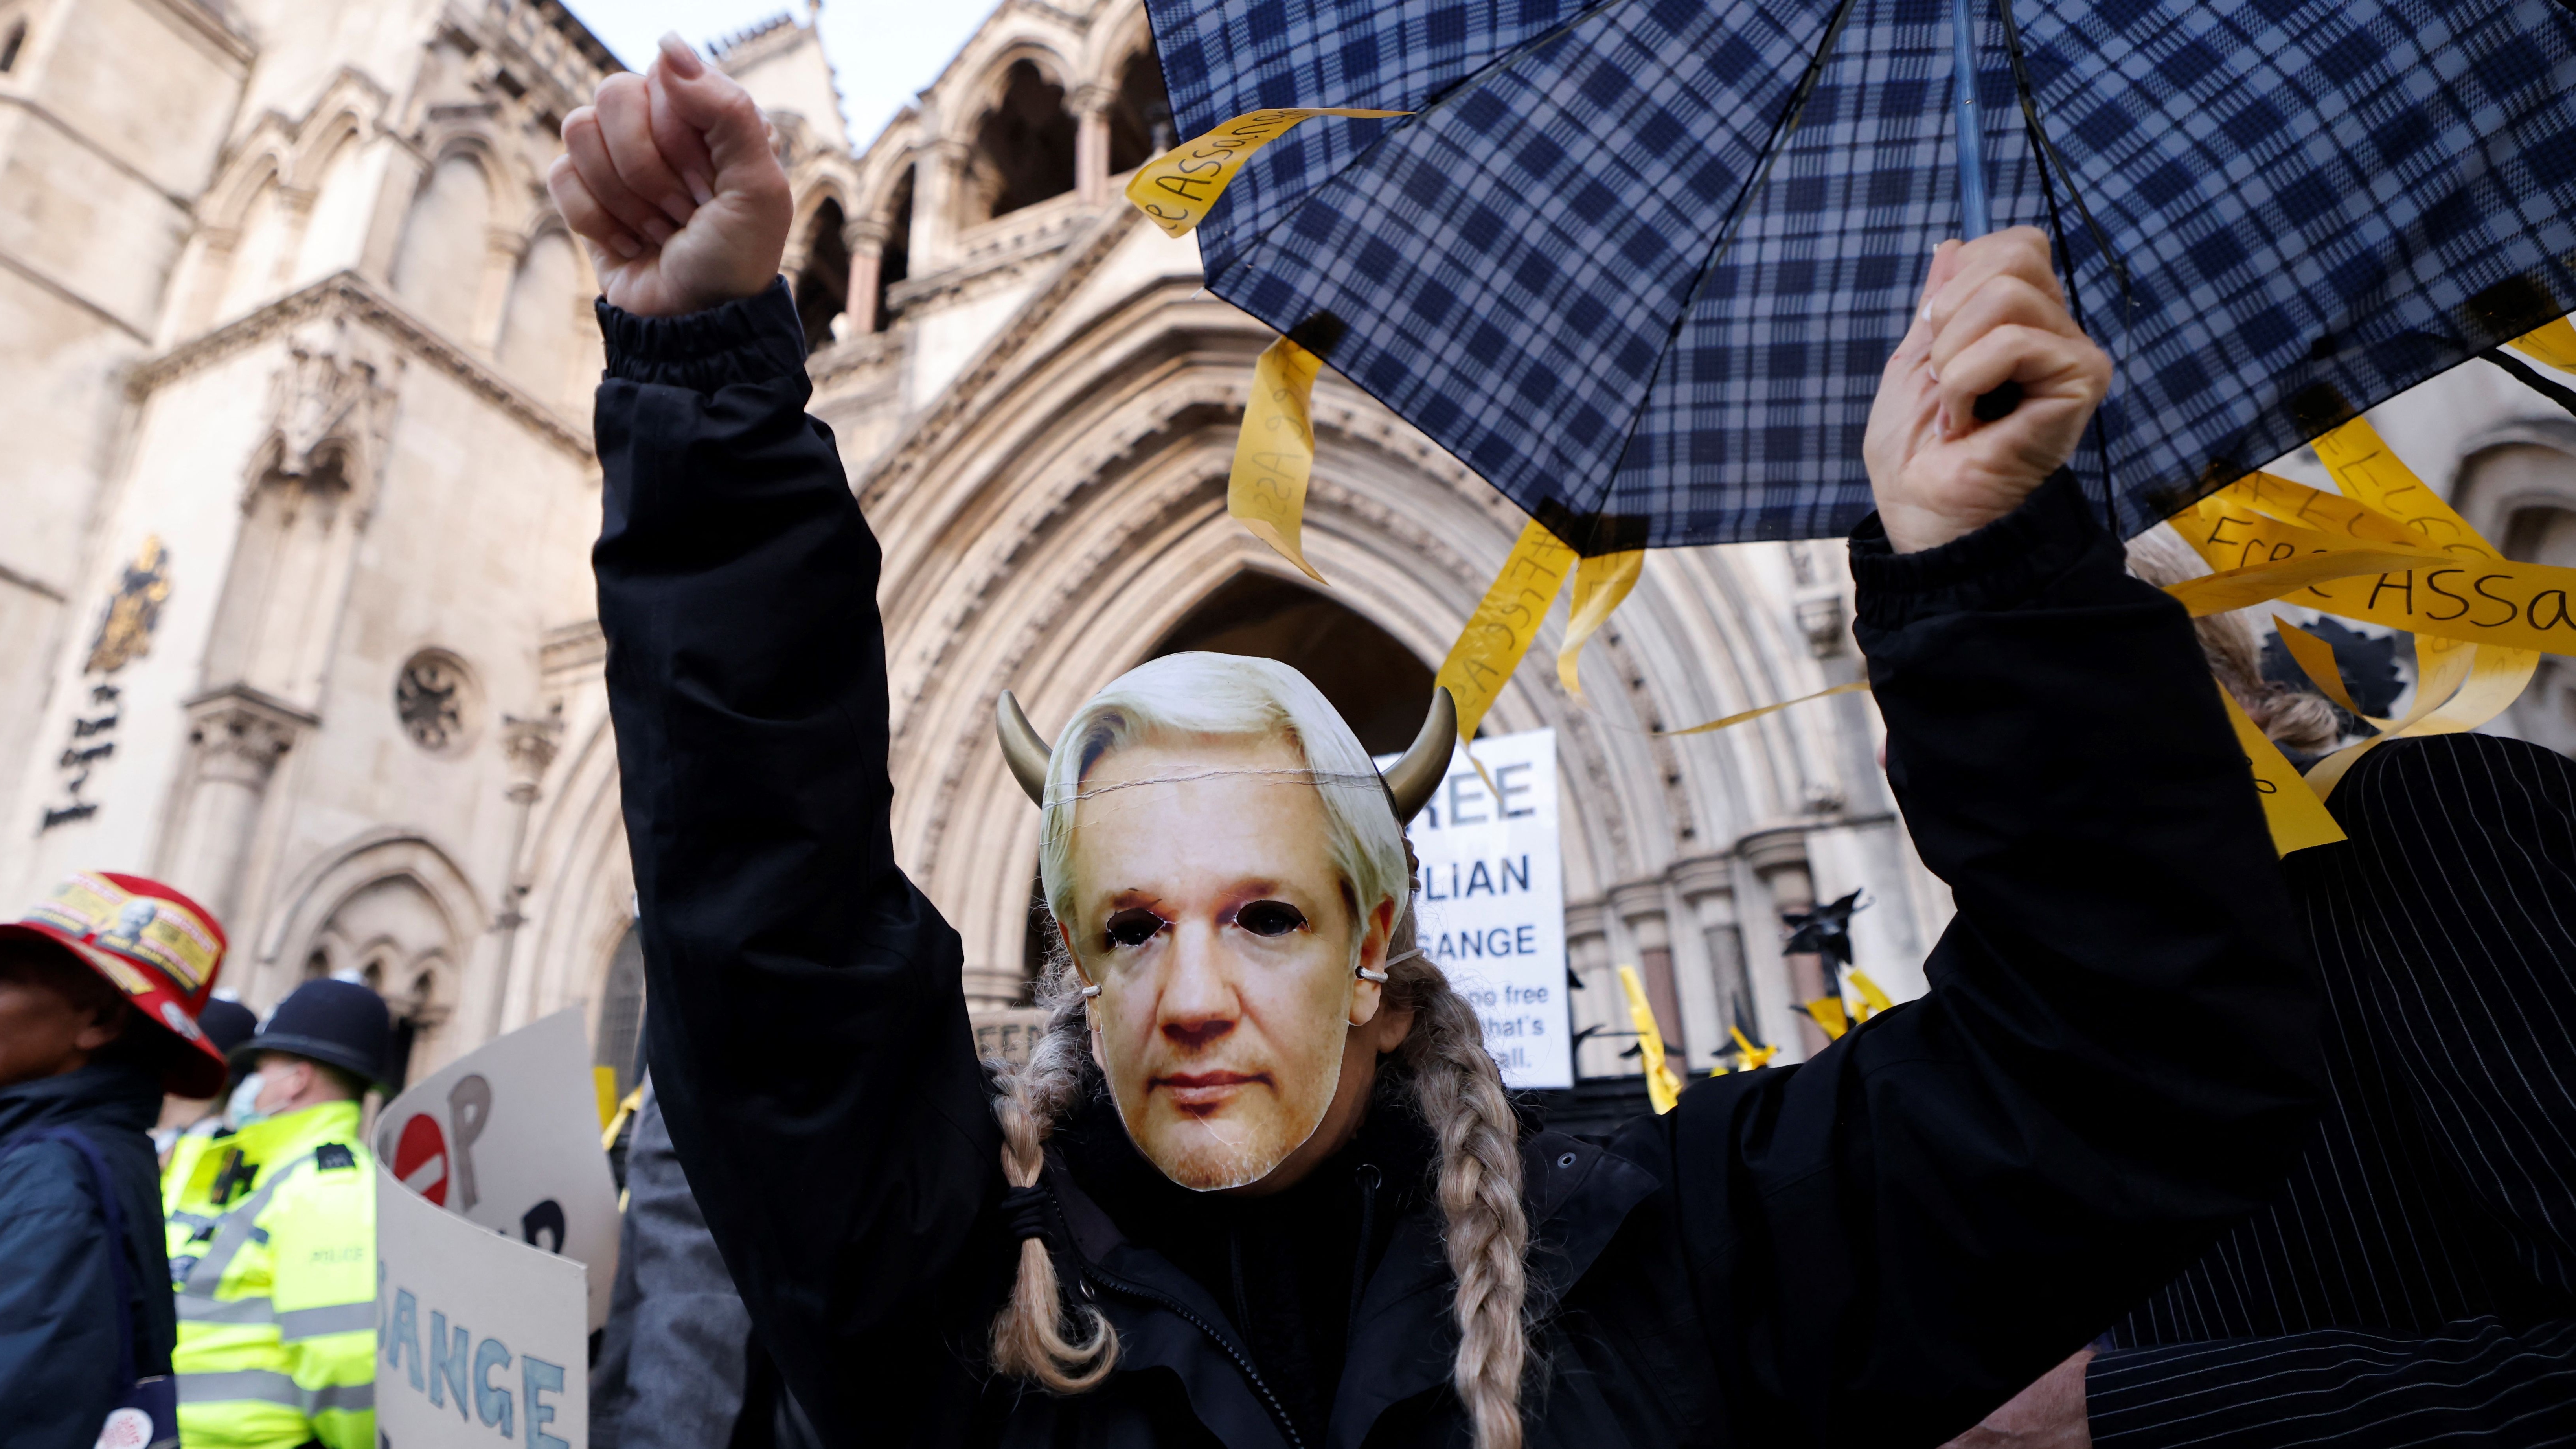 Protestors voice their support for Julian Assange outside the High Court in London